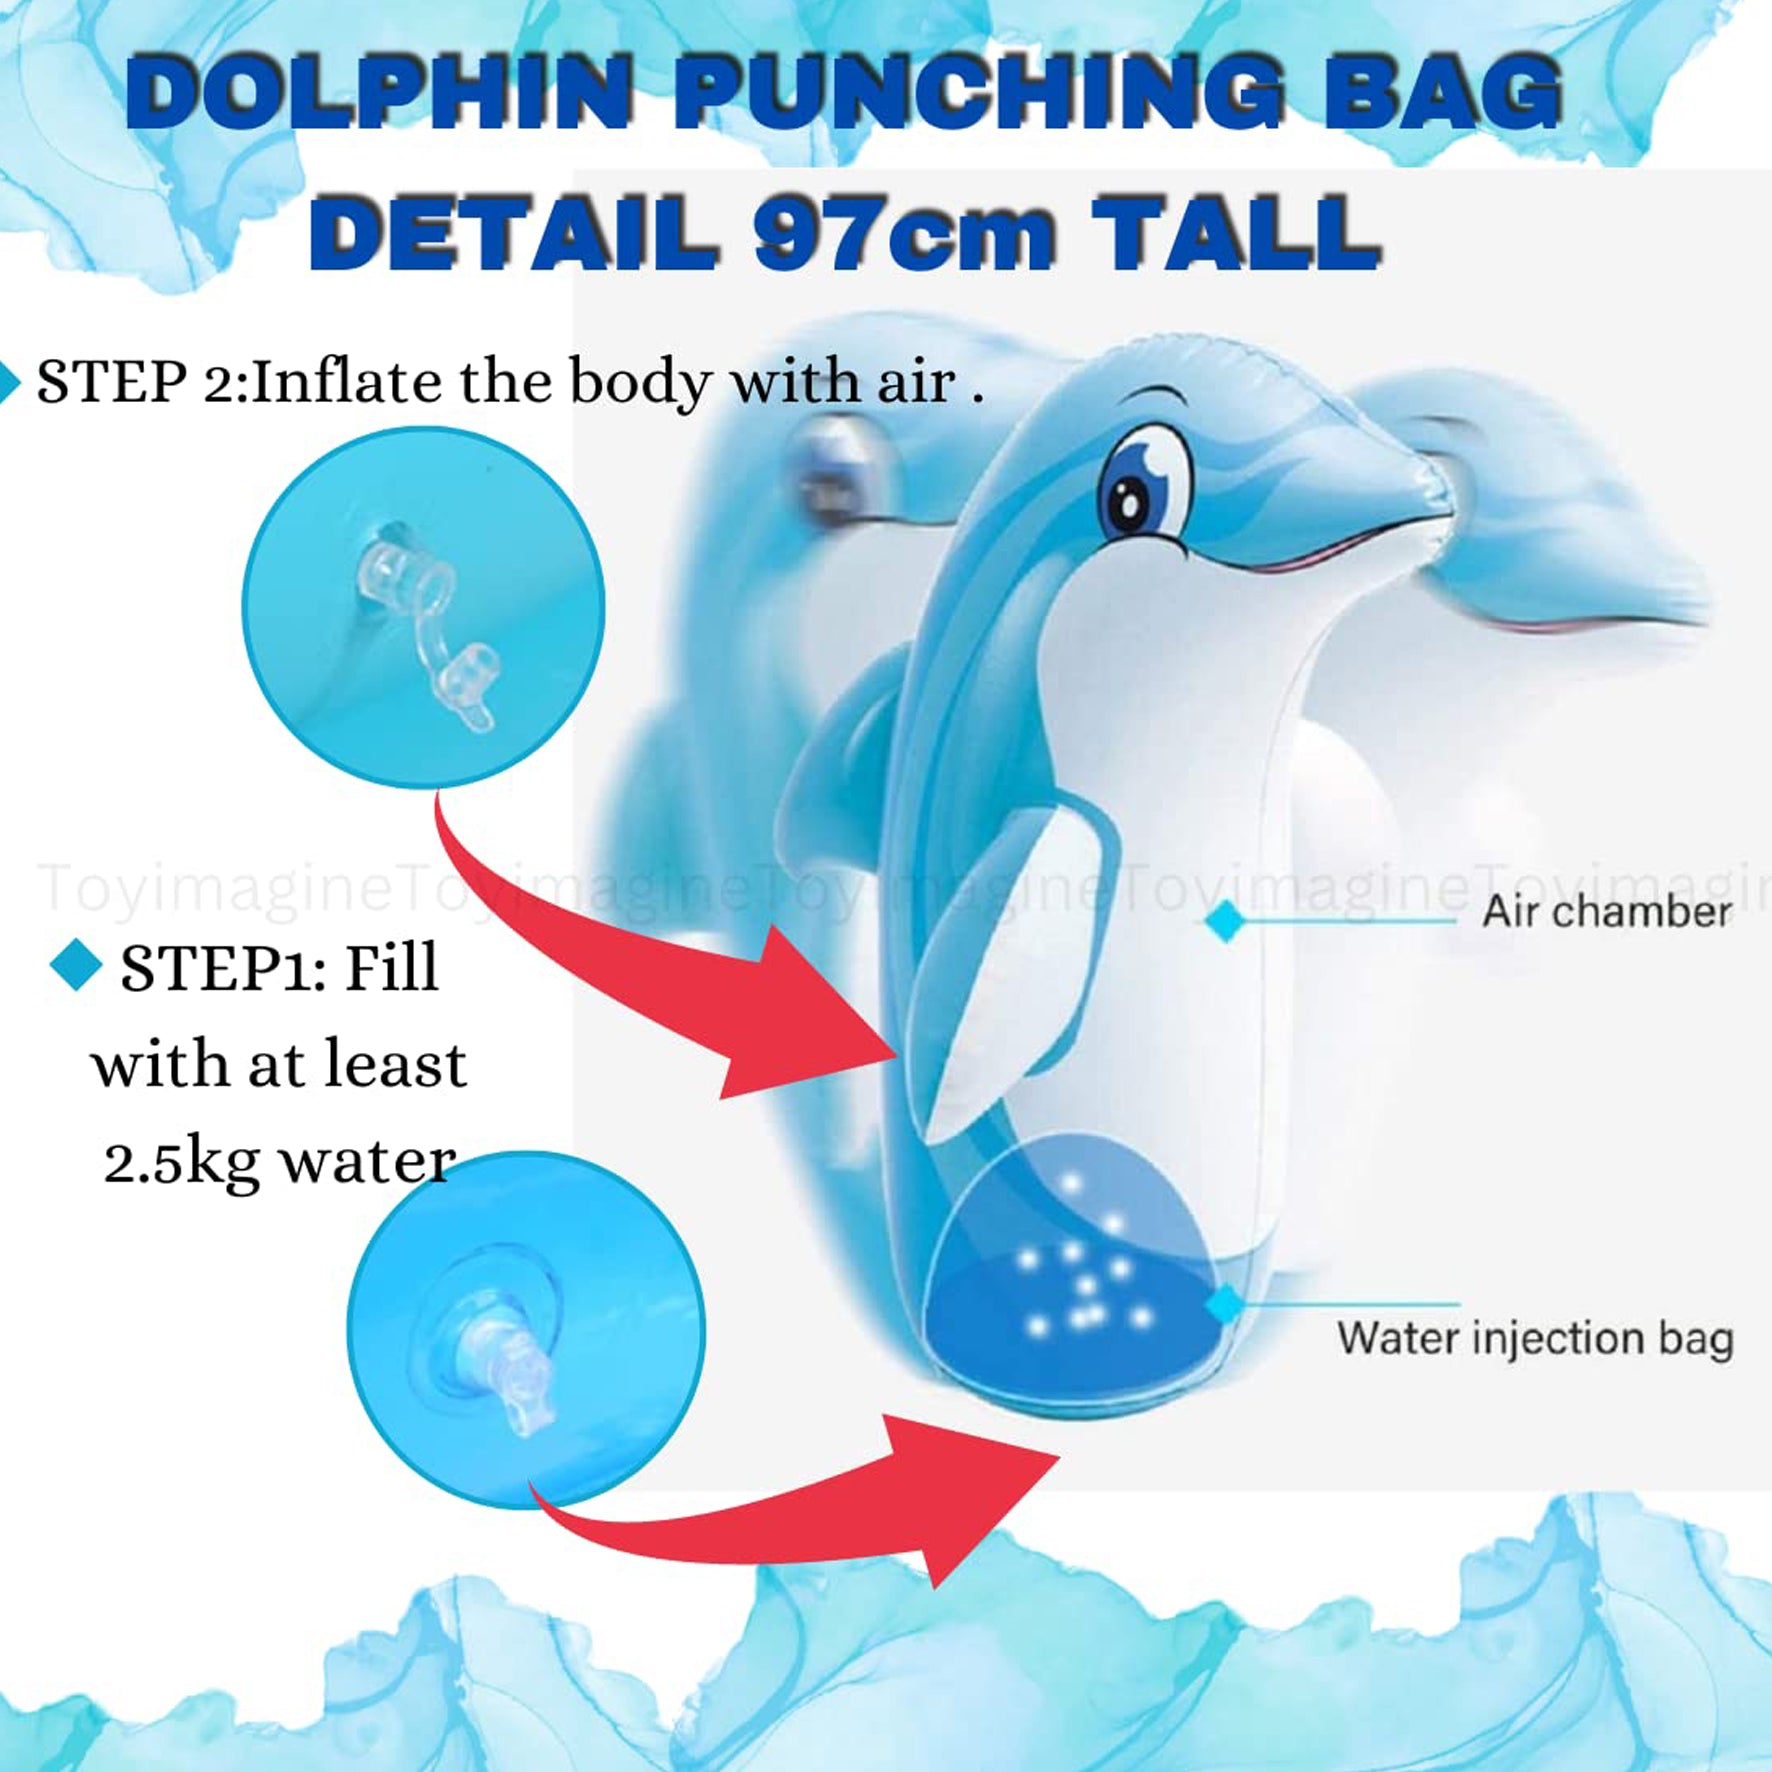 Dolphin Hit Me Toy 3-D Inflatable Animal Toy | Water Base and Air Base for Toddlers | PVC Punching Bag for Kids | Activity Toy for Kids Age 3 +.